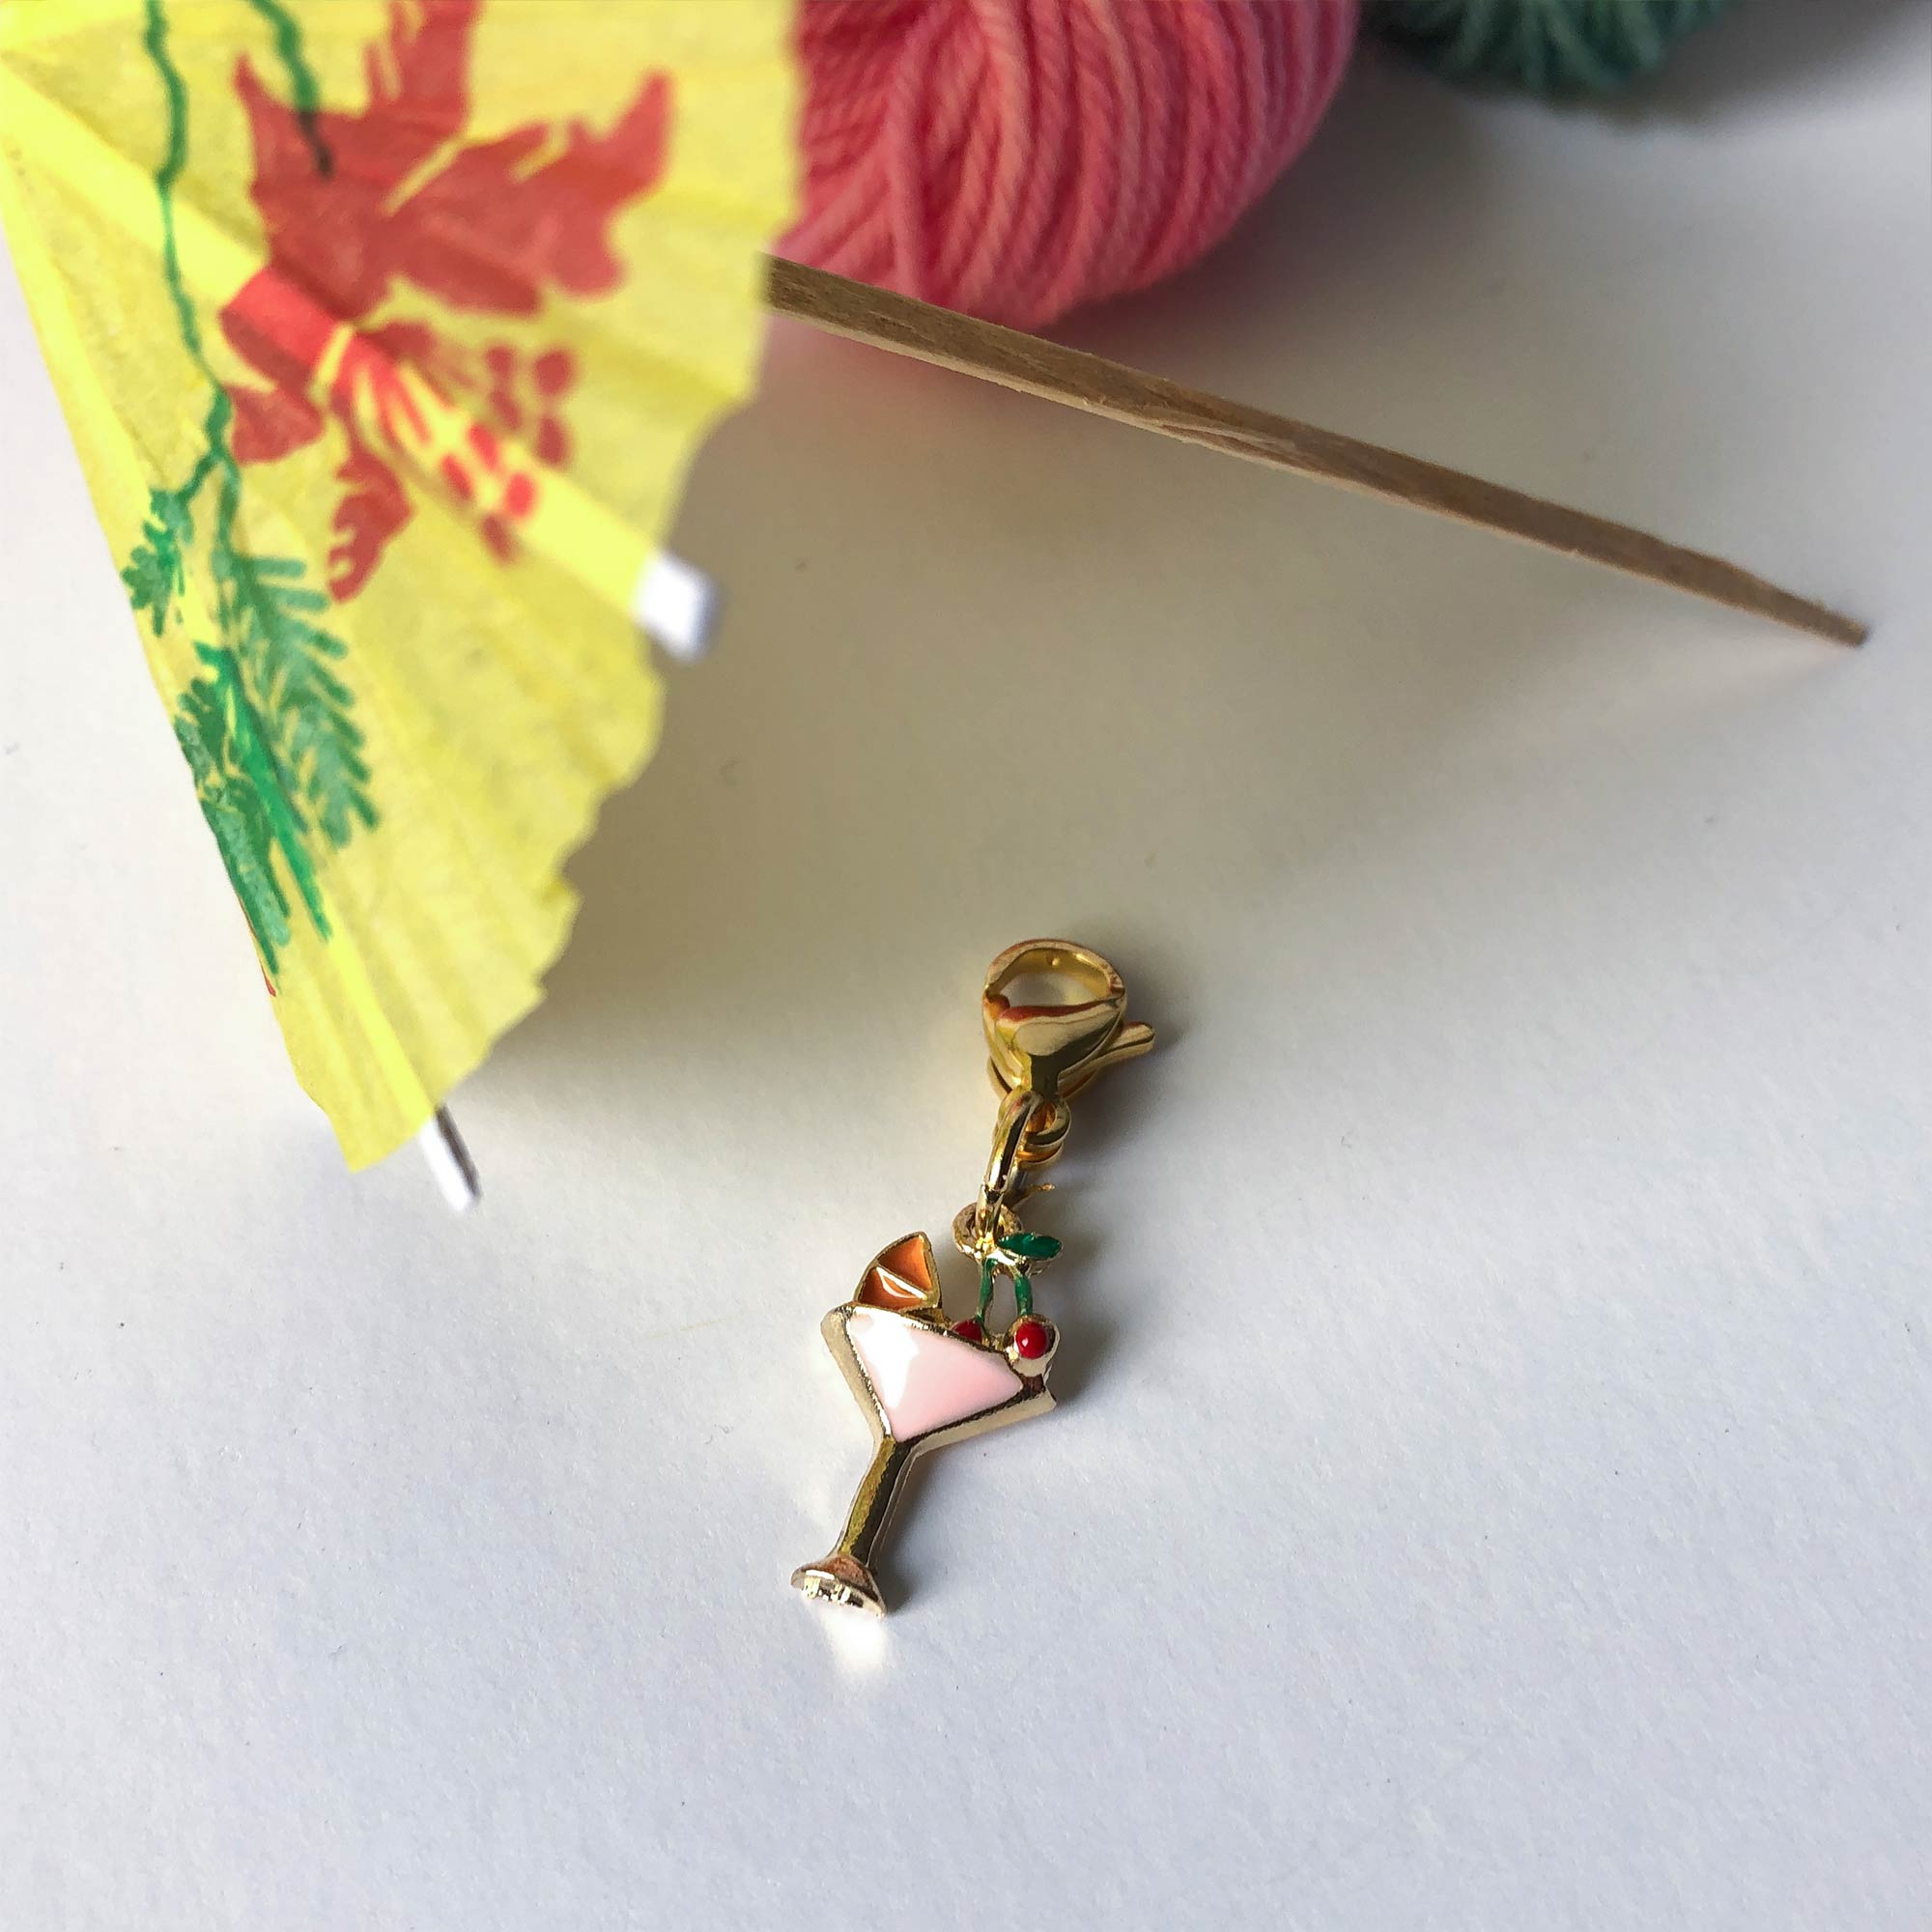 stitch marker and drink umbrella comes with the mini-skein set of five 